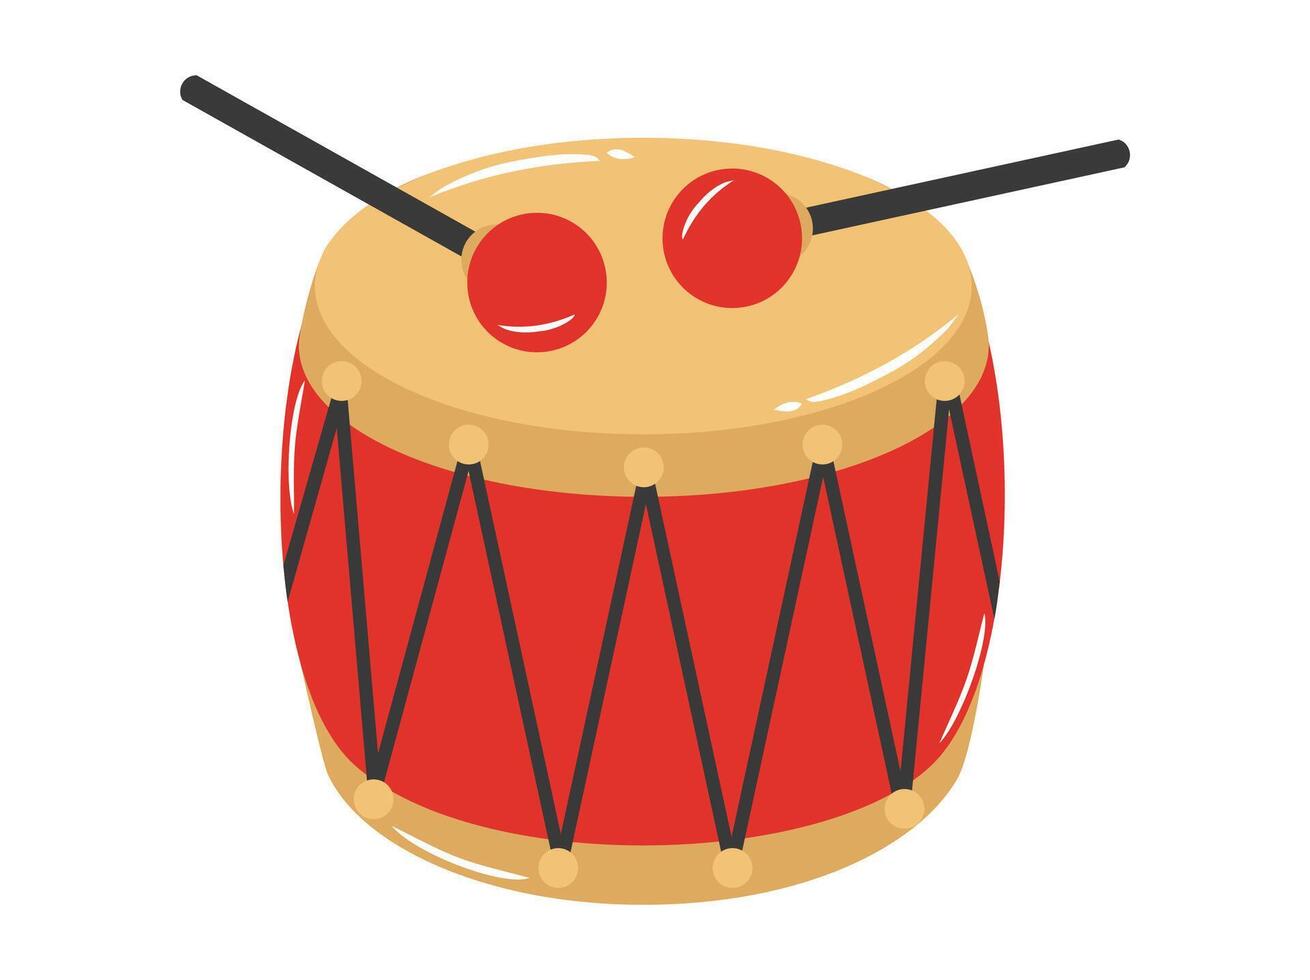 Chinese New Year Drum Illustration vector